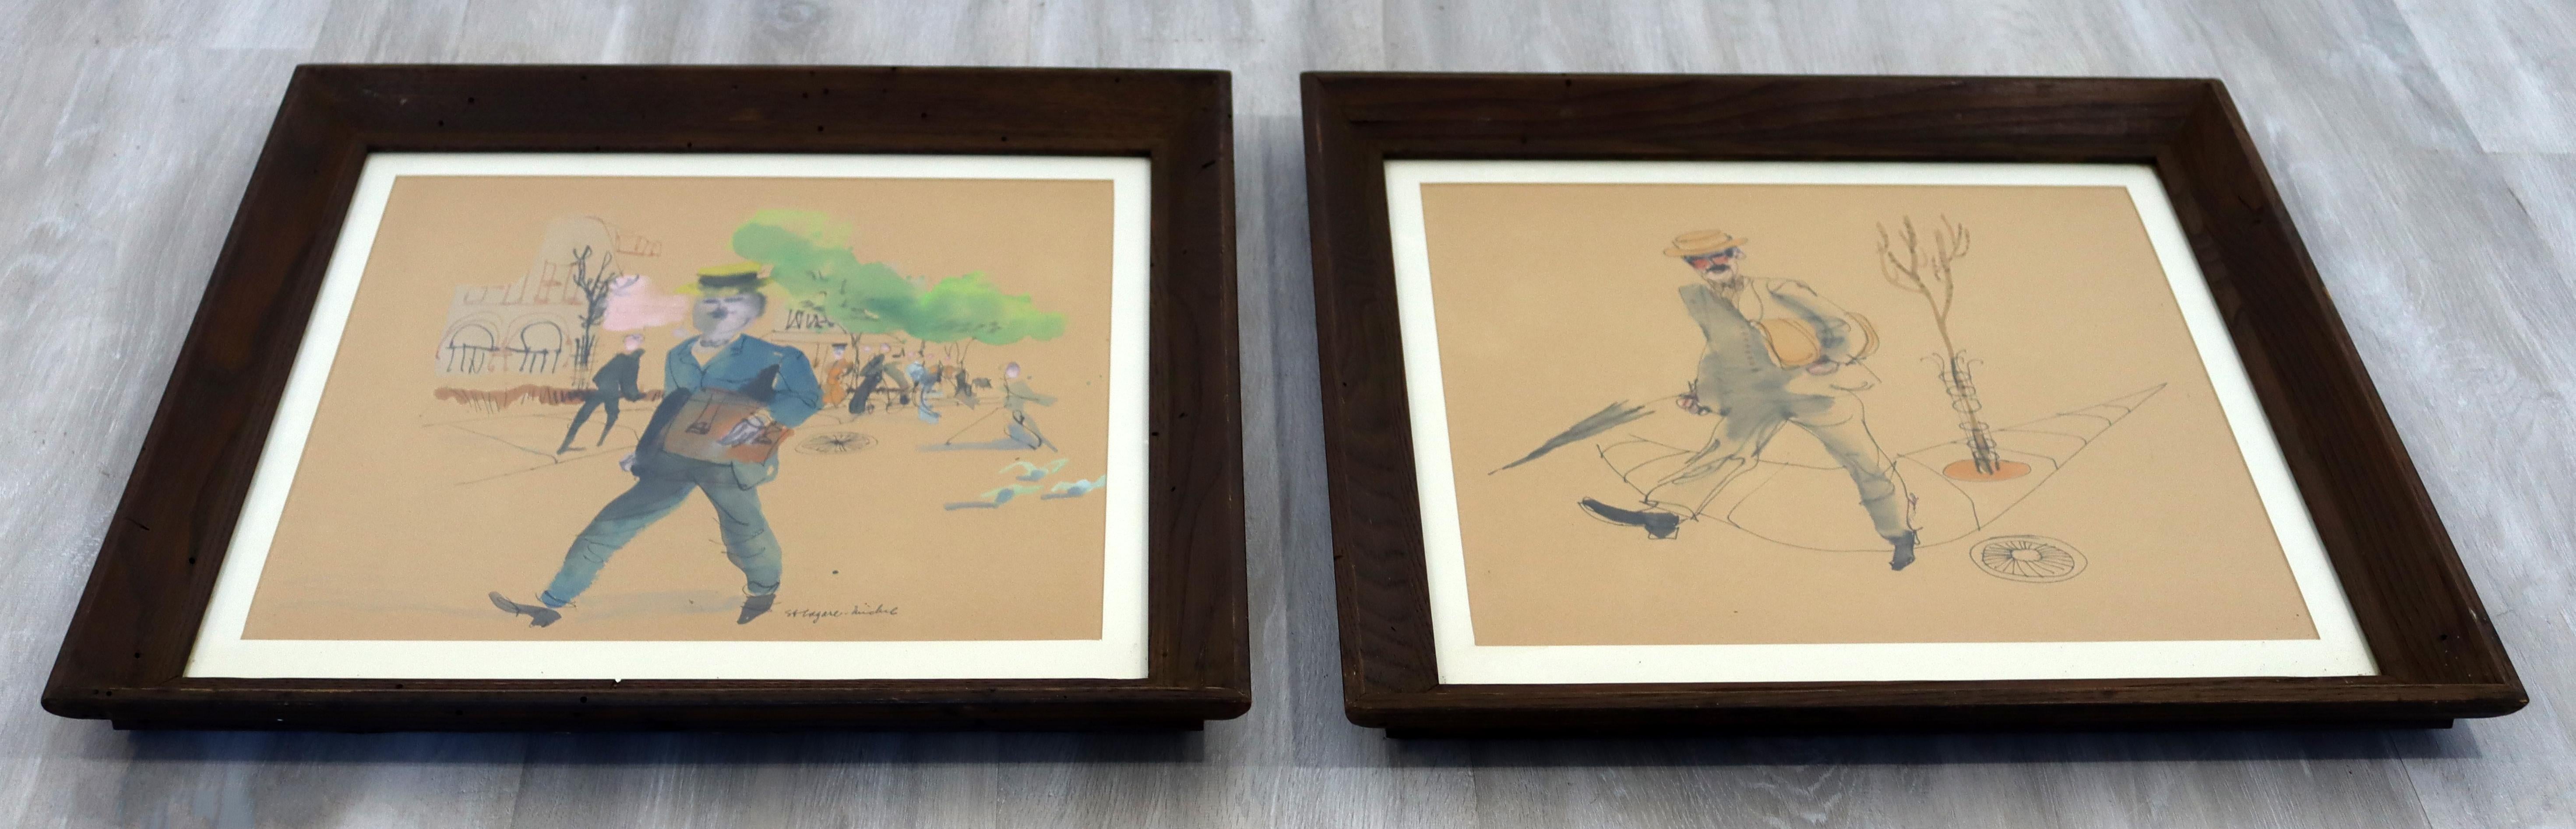 Paper Mid-Century Modern Framed Pair of Watercolor Paintings Signed St. Lagare Michael